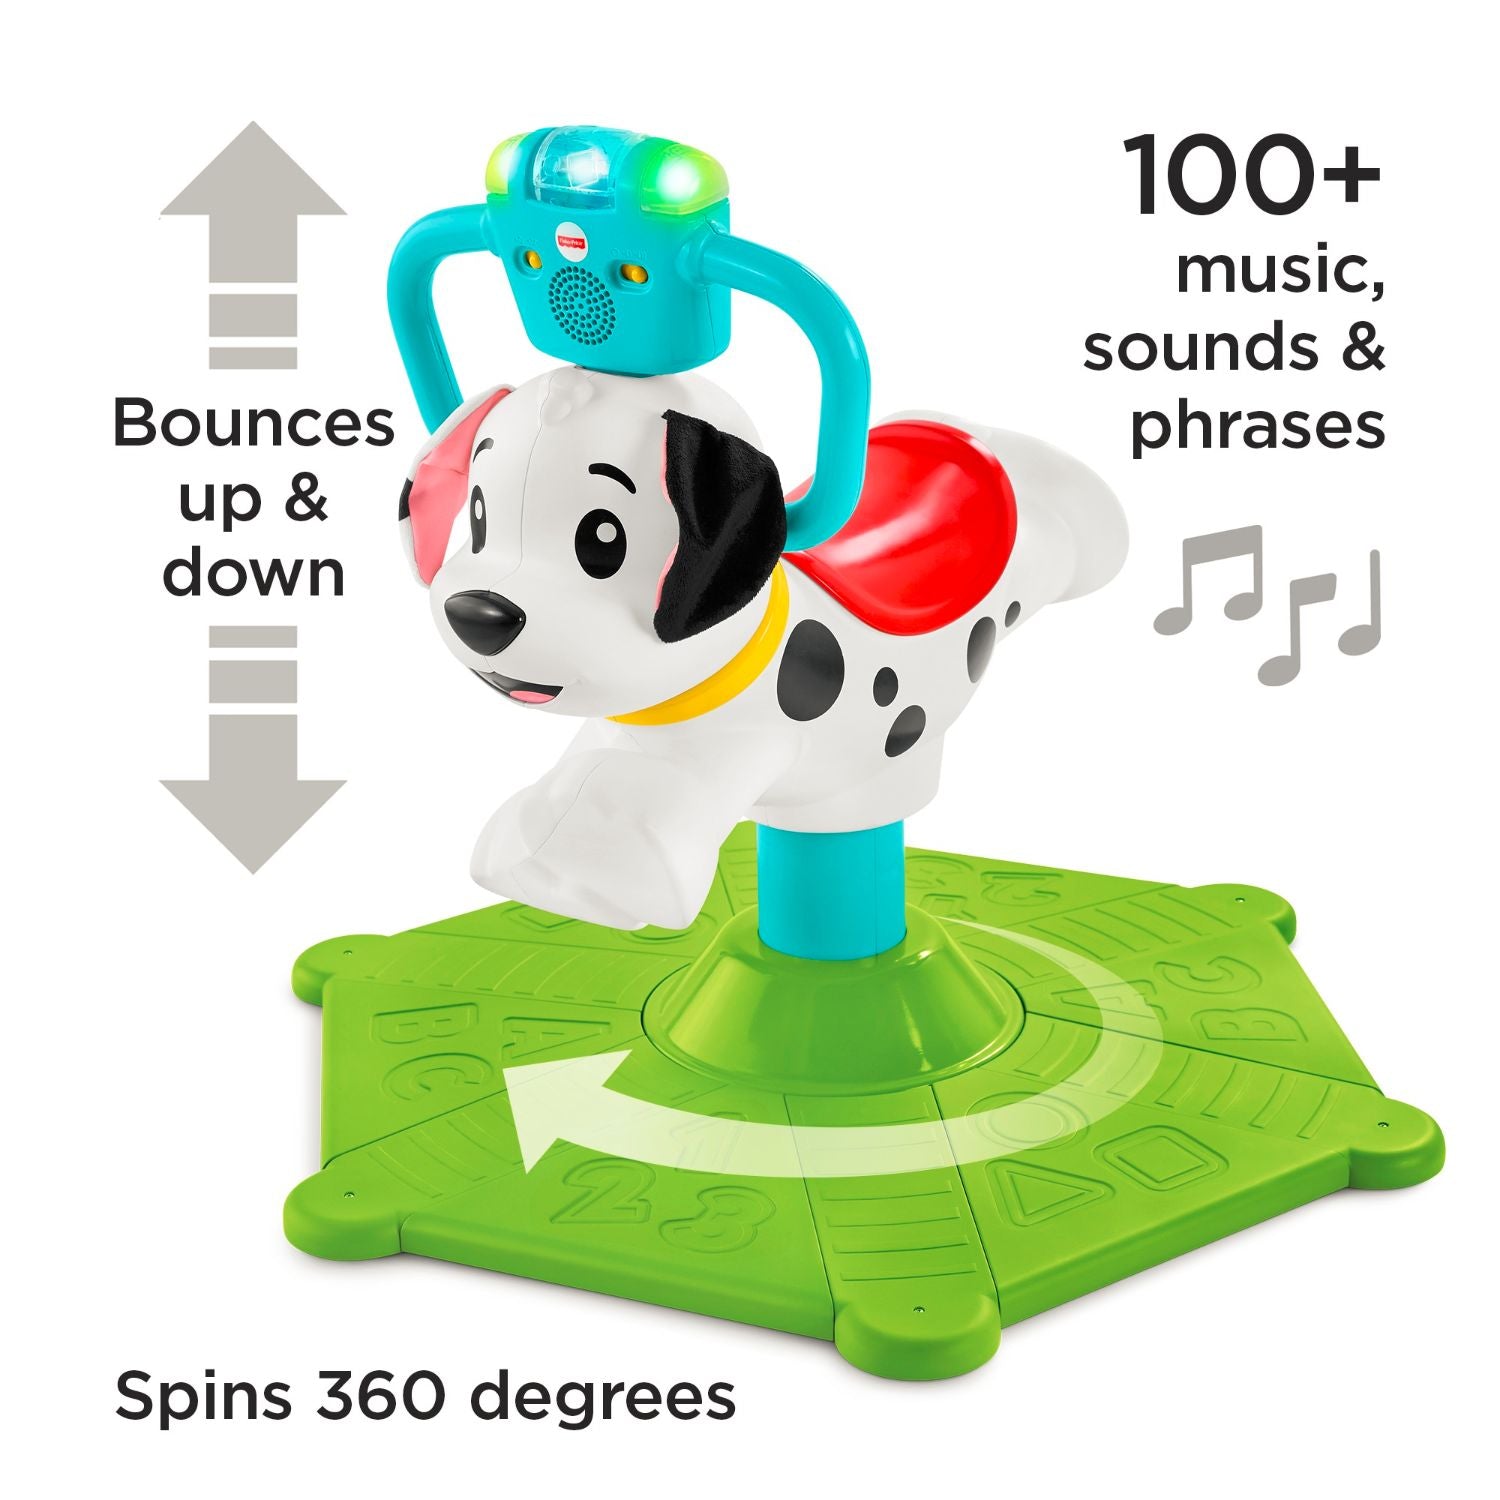 Fisher-Price Now Has Toys for Dogs